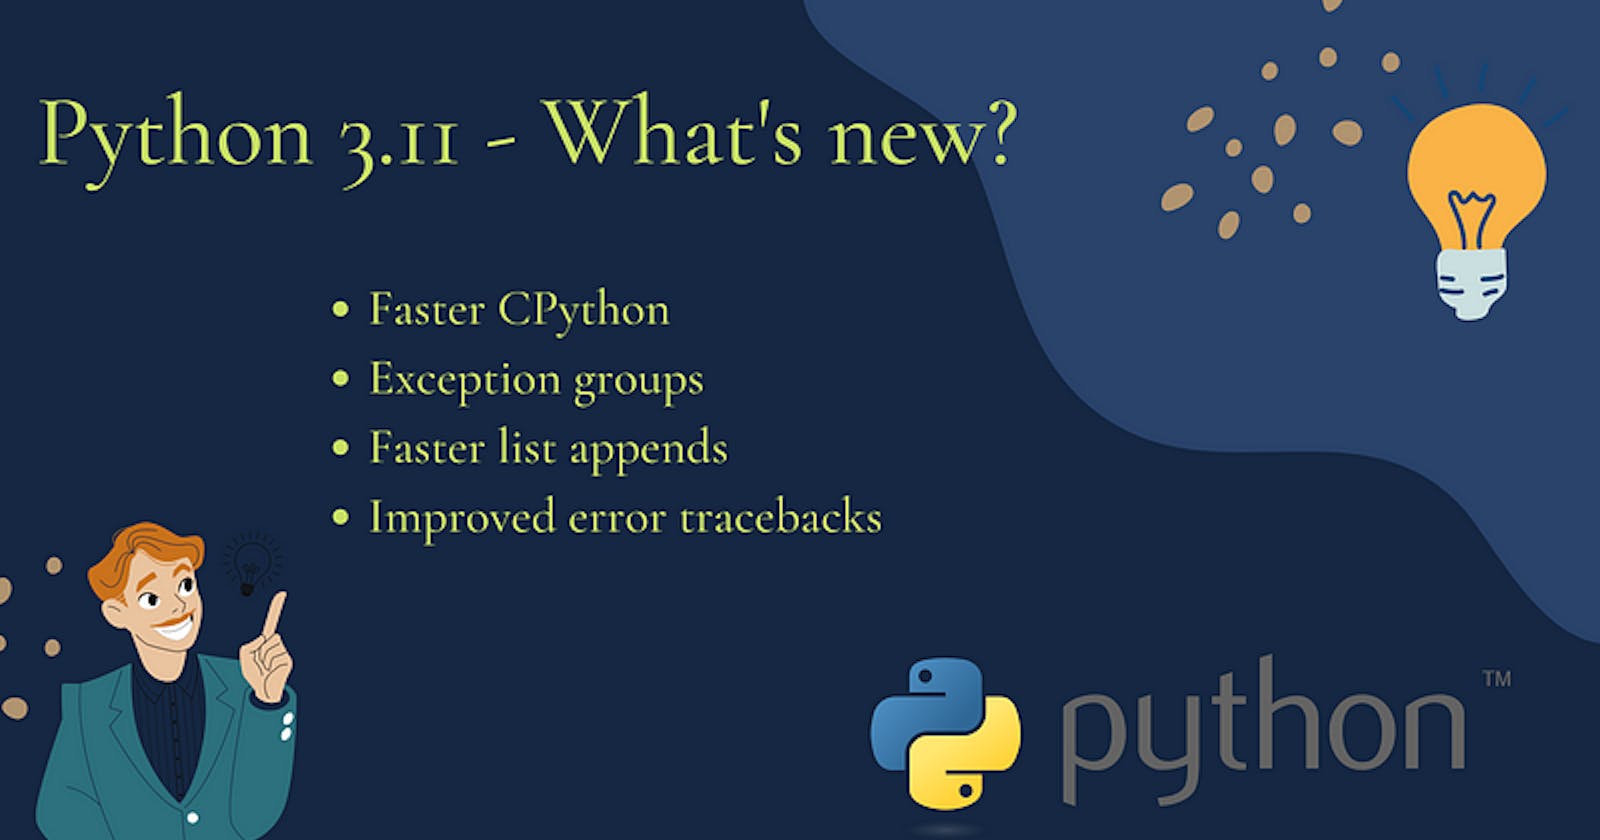 Python 3.11 — What’s cooking?